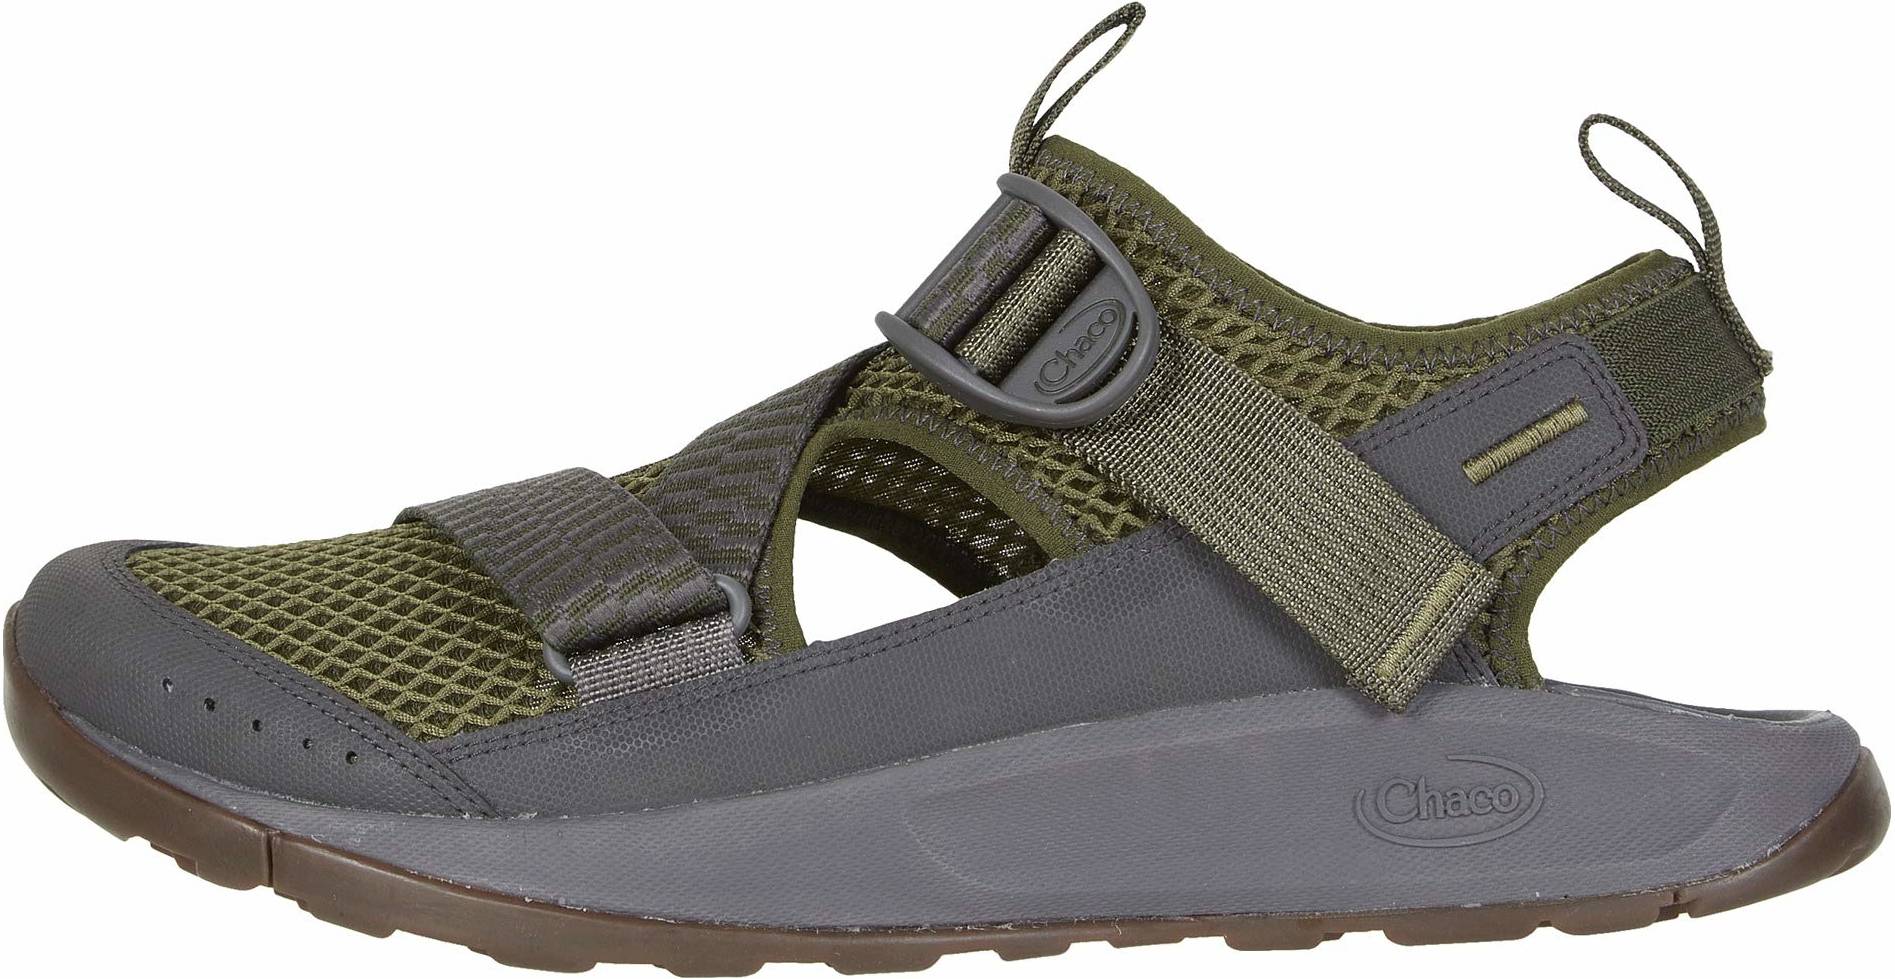 Chaco Men's Odyssey Hiking Shoe Comfort Walking Travel Sneakers Trail Casual